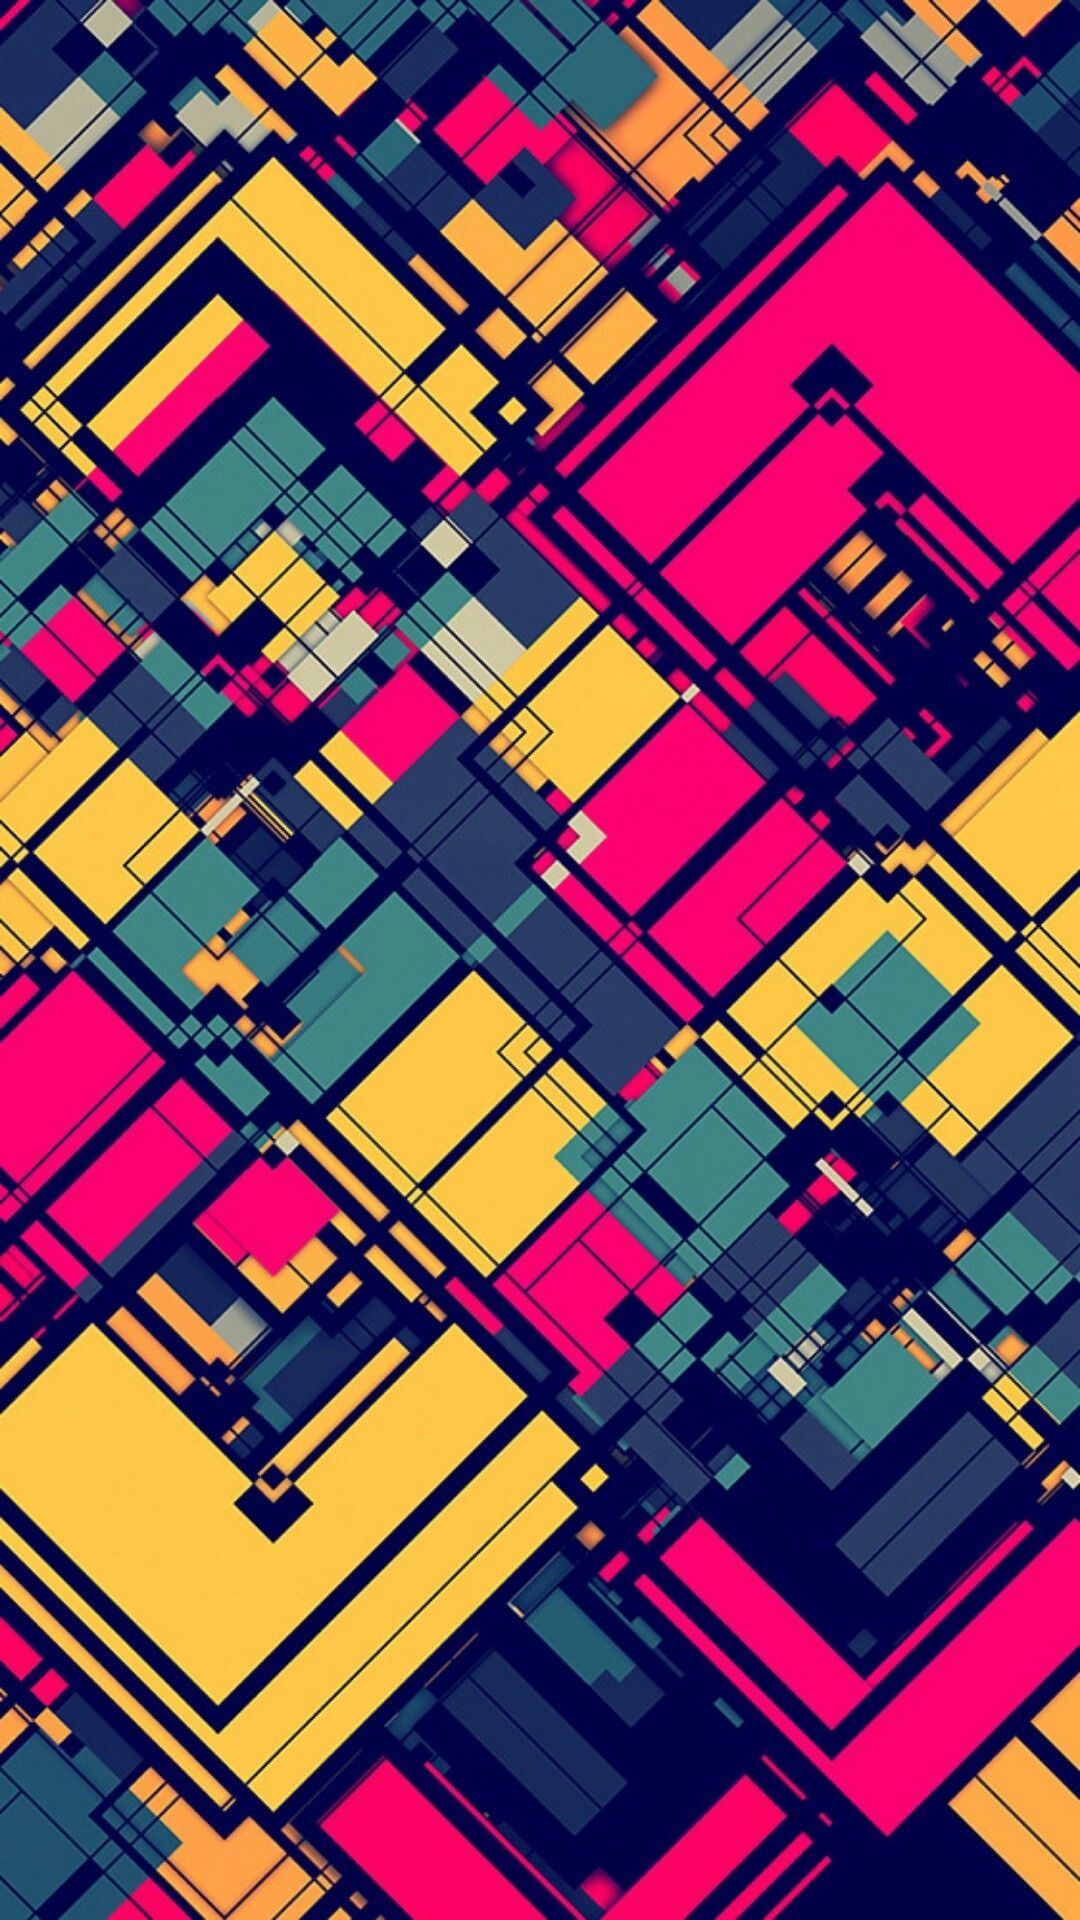 Pink and Yellow Abstract Grid Wallpaper. Digital illustration, Abstract, Grid wallpaper